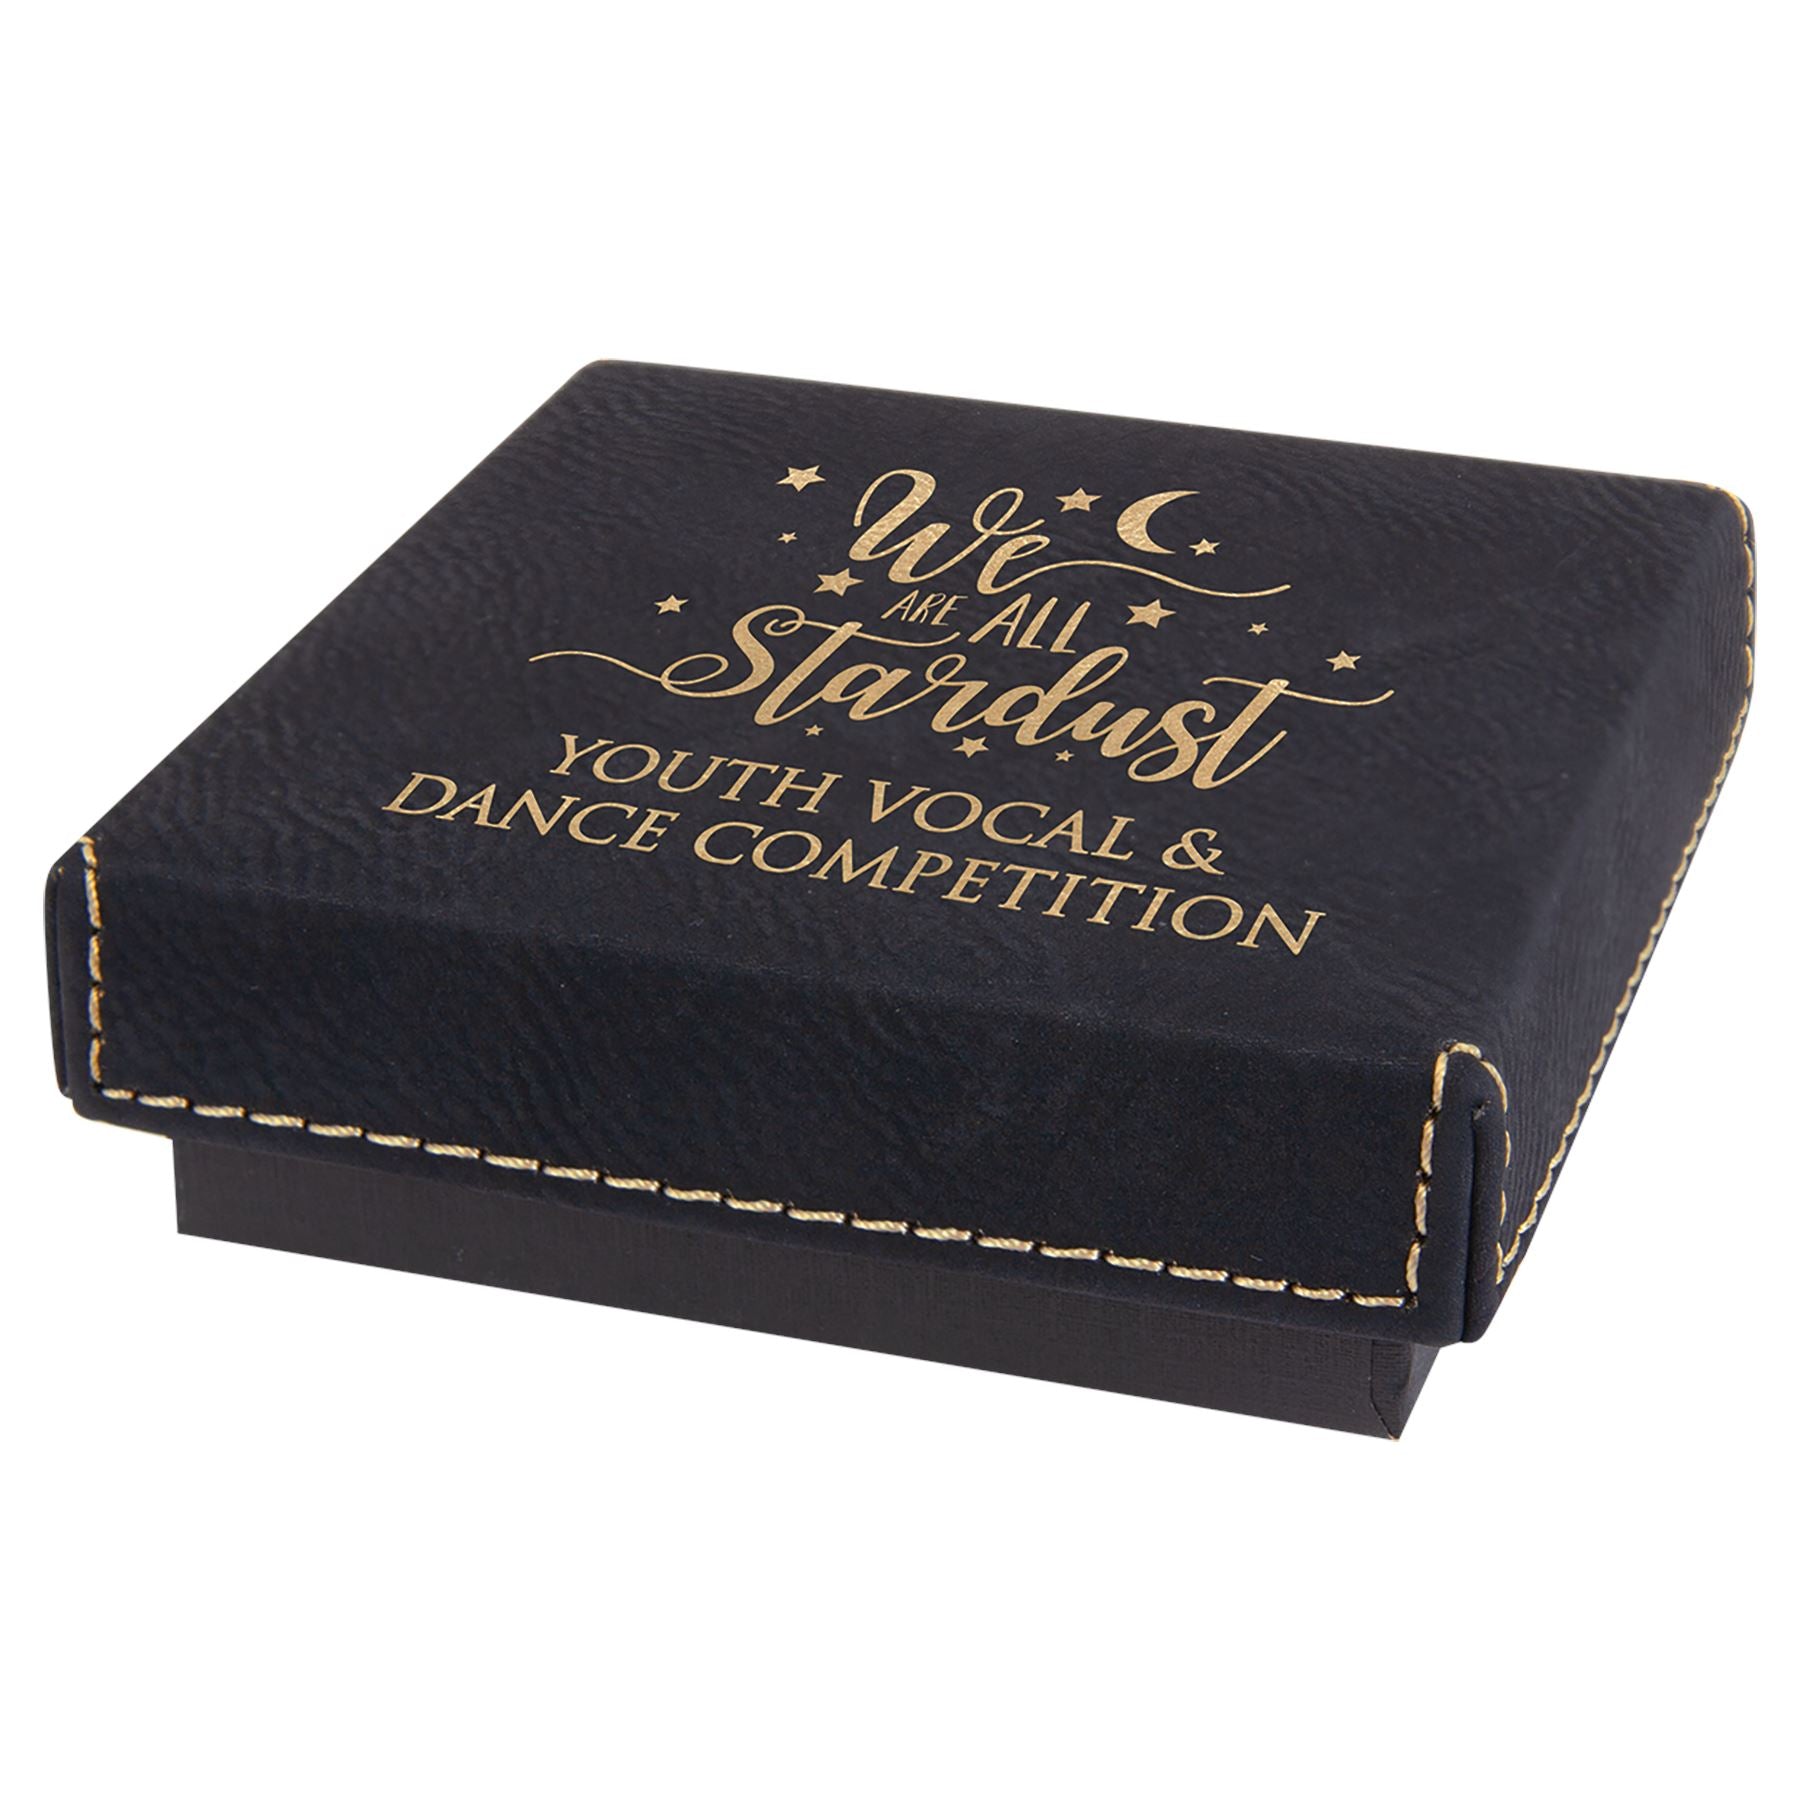 Medal / Gift Box, 3 1/2" x 3 1/2" with Laserable Leatherette Lid, Laser Engraved Gift Box Craftworks NW Black/Gold Small 